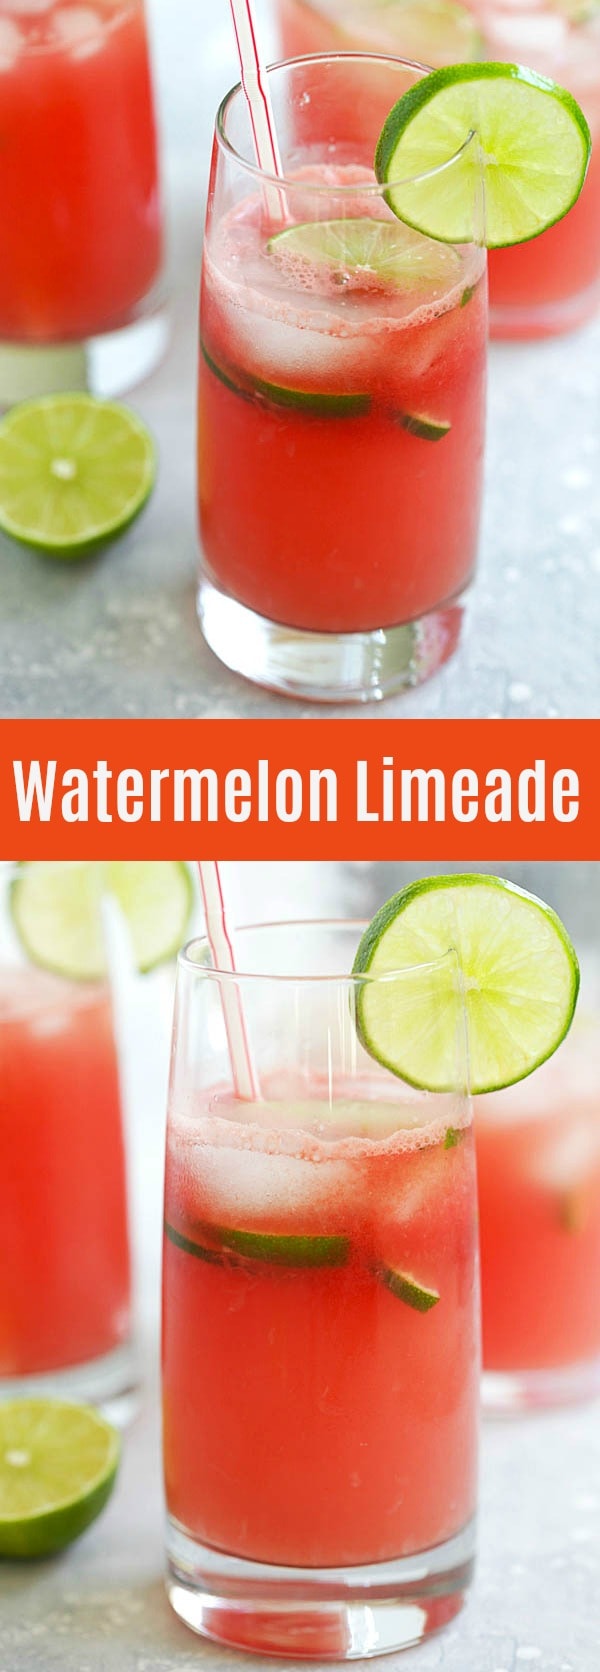 Watermelon Limeade - refreshing summer beverage of limeade with fresh watermelon juice. A perfect thirst quencher for backyard BBQs and parties | rasamalaysia.com